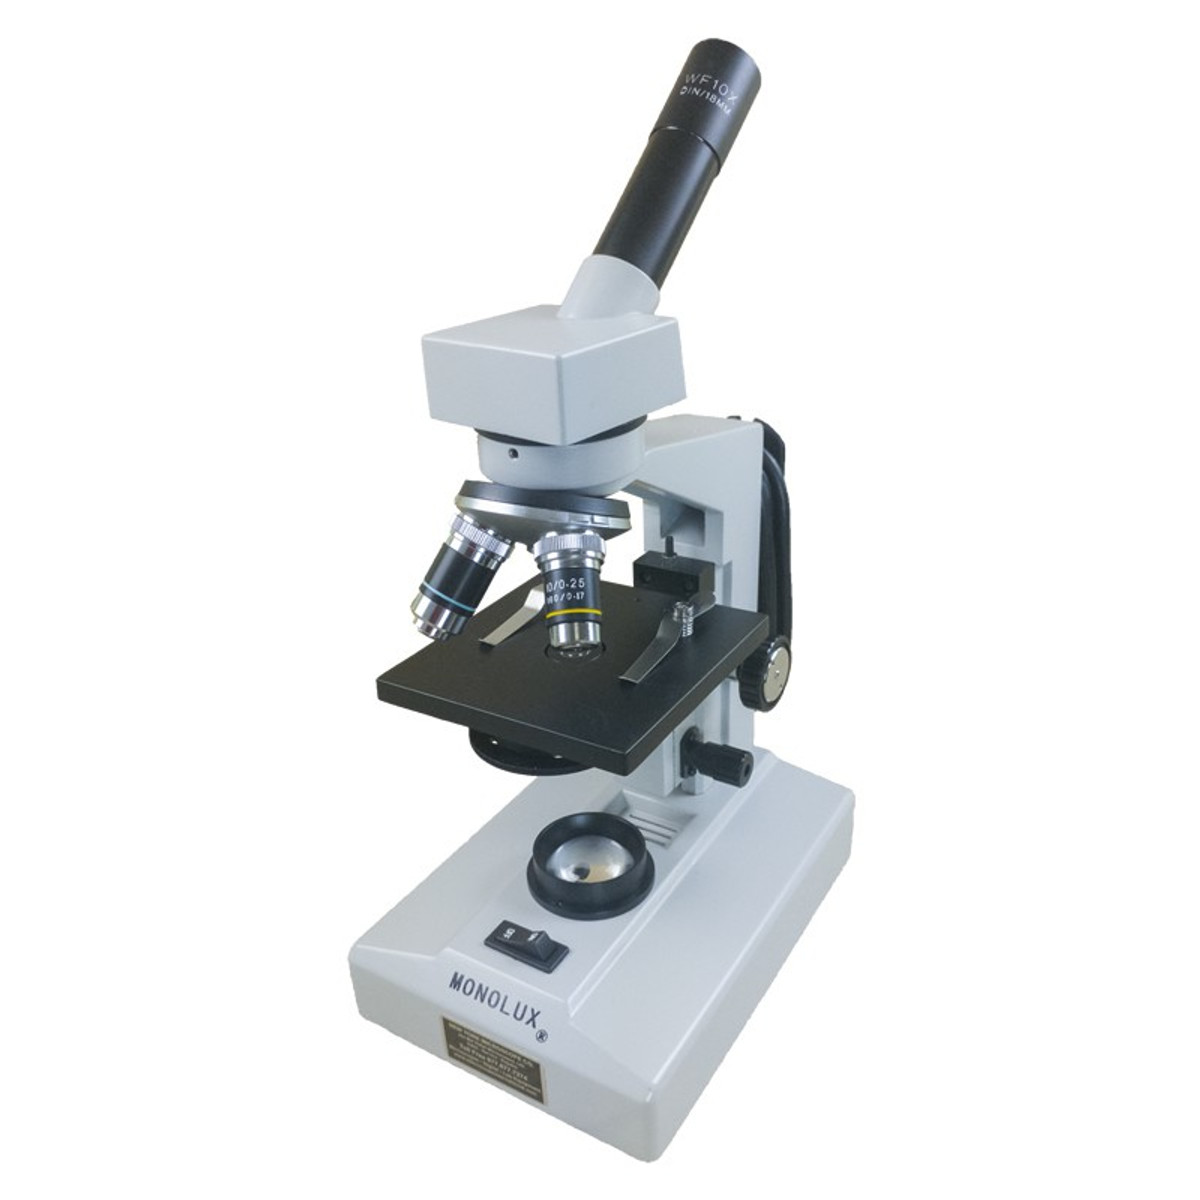 Feilx Monocular Biological Microscope, with 3 Magnification and 360-degree  Rotatable Objective Lens,8 LED Fill Lights and Carrying Box